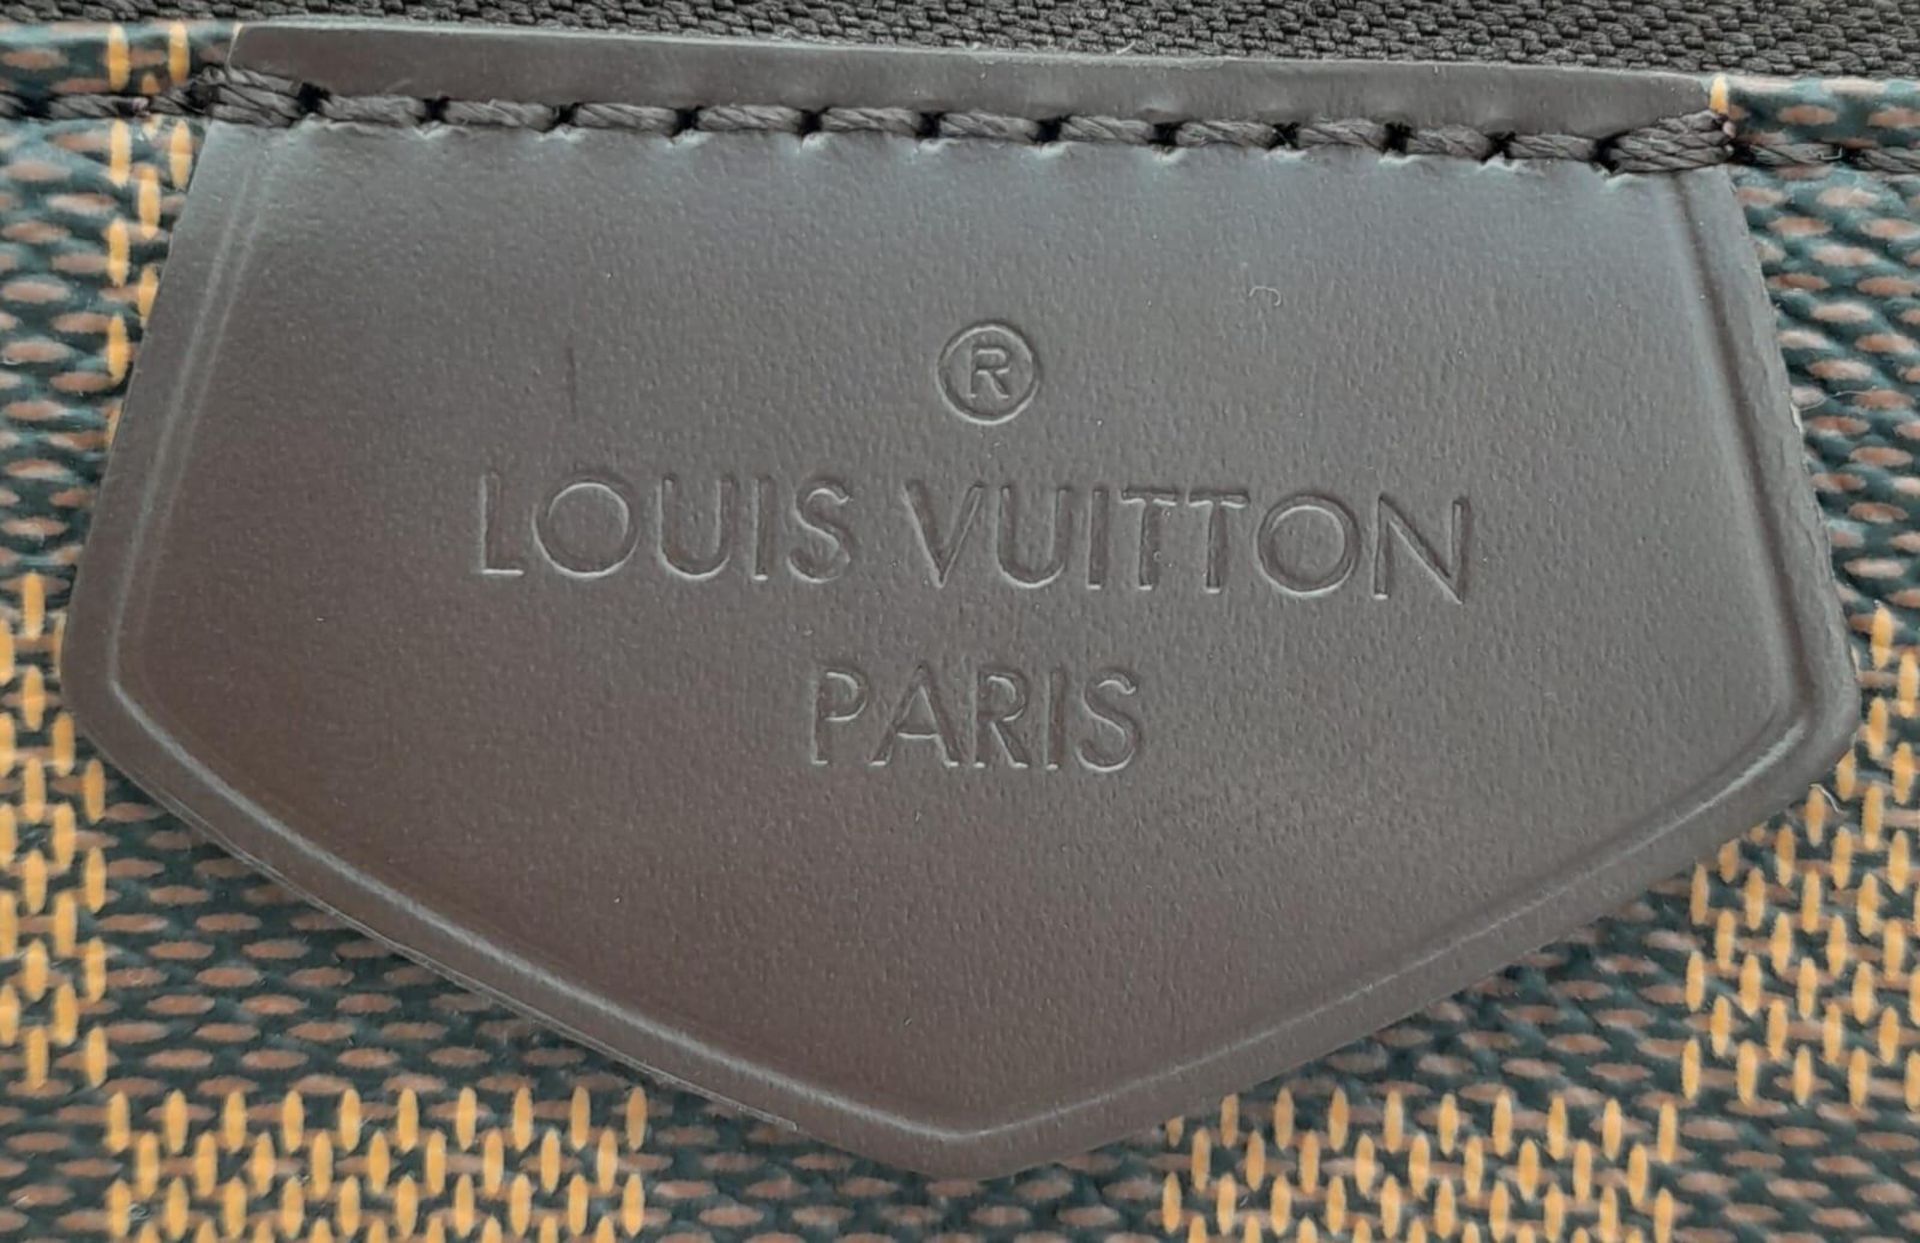 A Louis Vuitton Damier Ebene Brampton Handbag. Leather exterior with two rolled leather handles, - Image 9 of 11